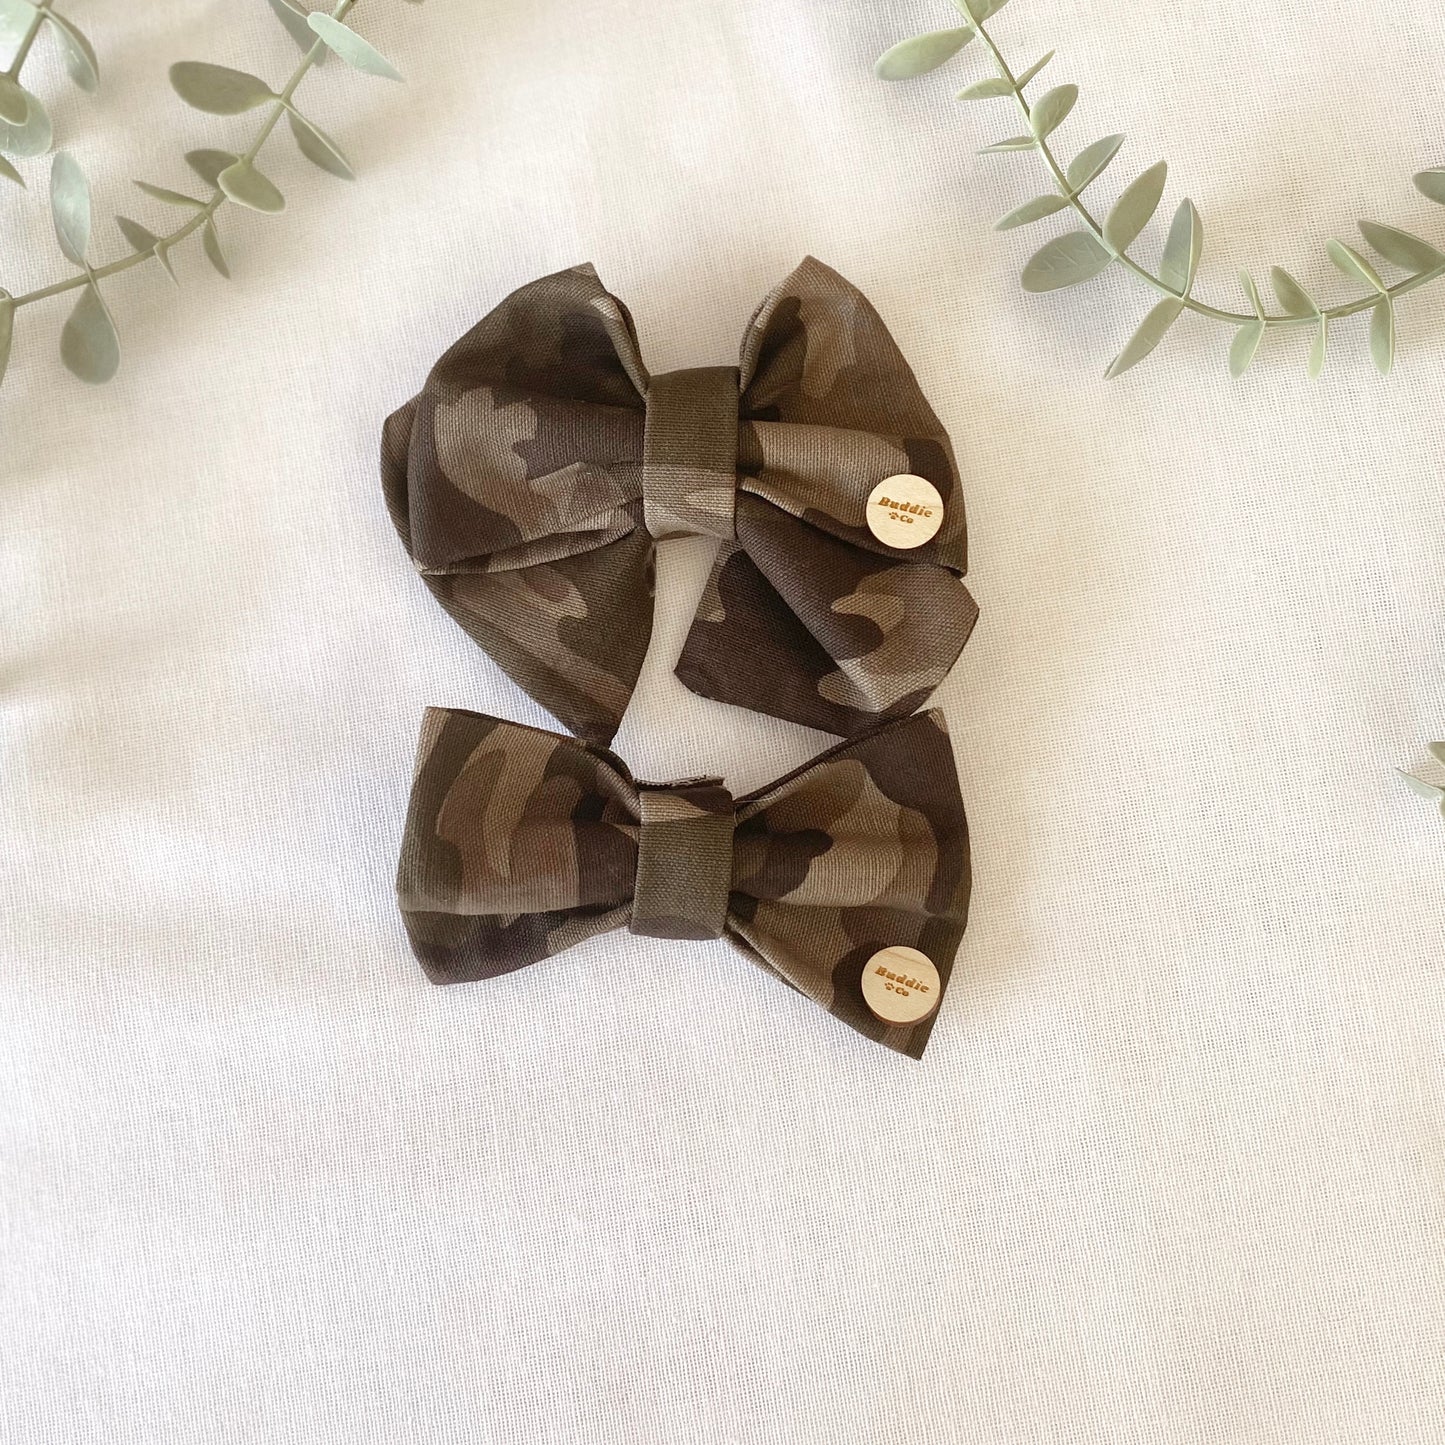 The ‘Hunter' Bow Tie